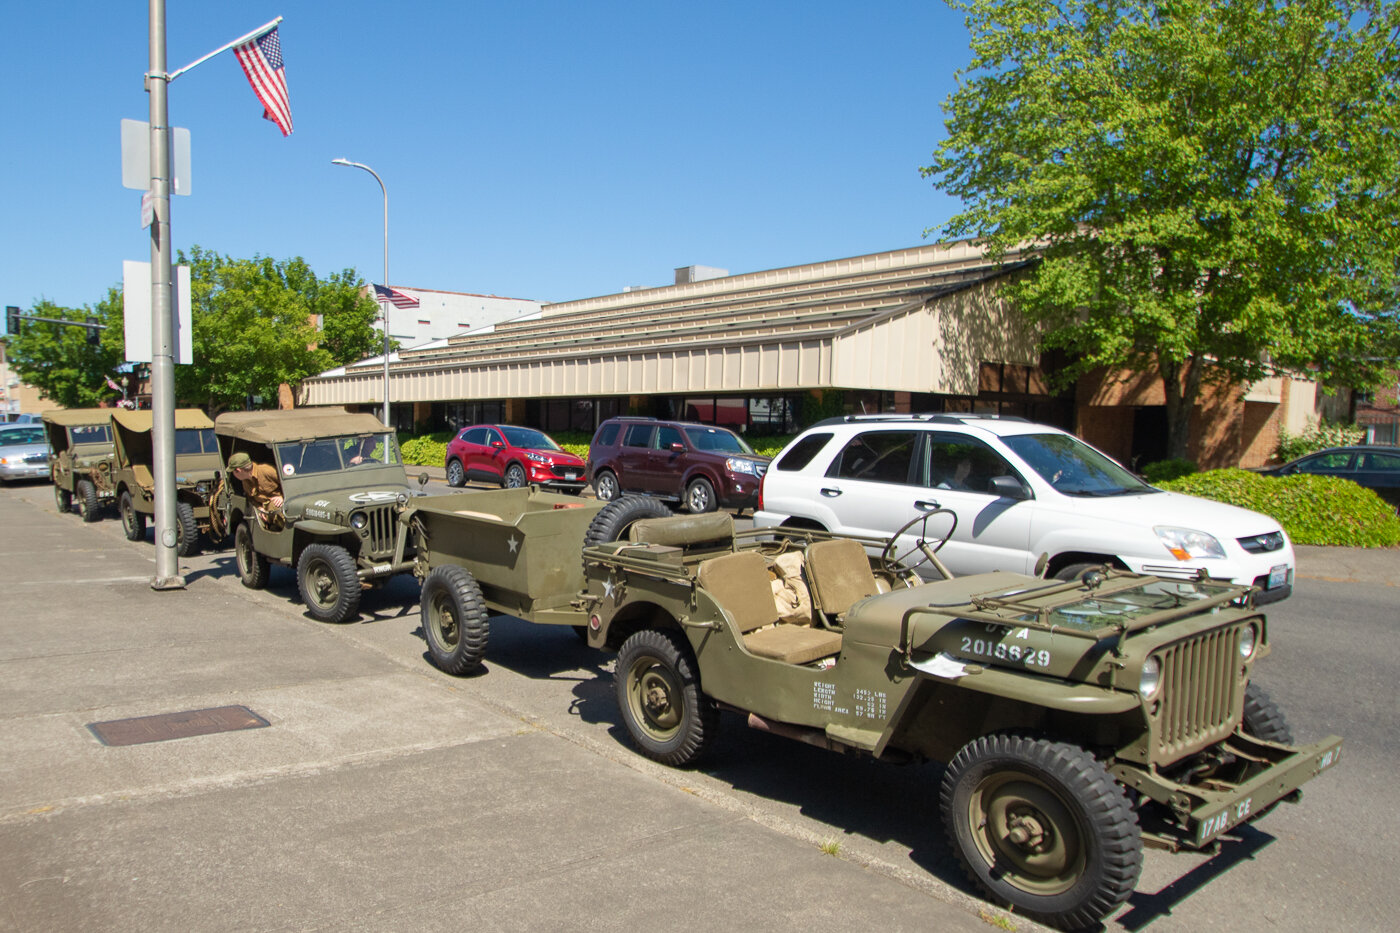 World War II era Jeeps from America's Team Museum in Centralia sit parked on display at George Washington Park on Monday for a Memorial Day ceremony.